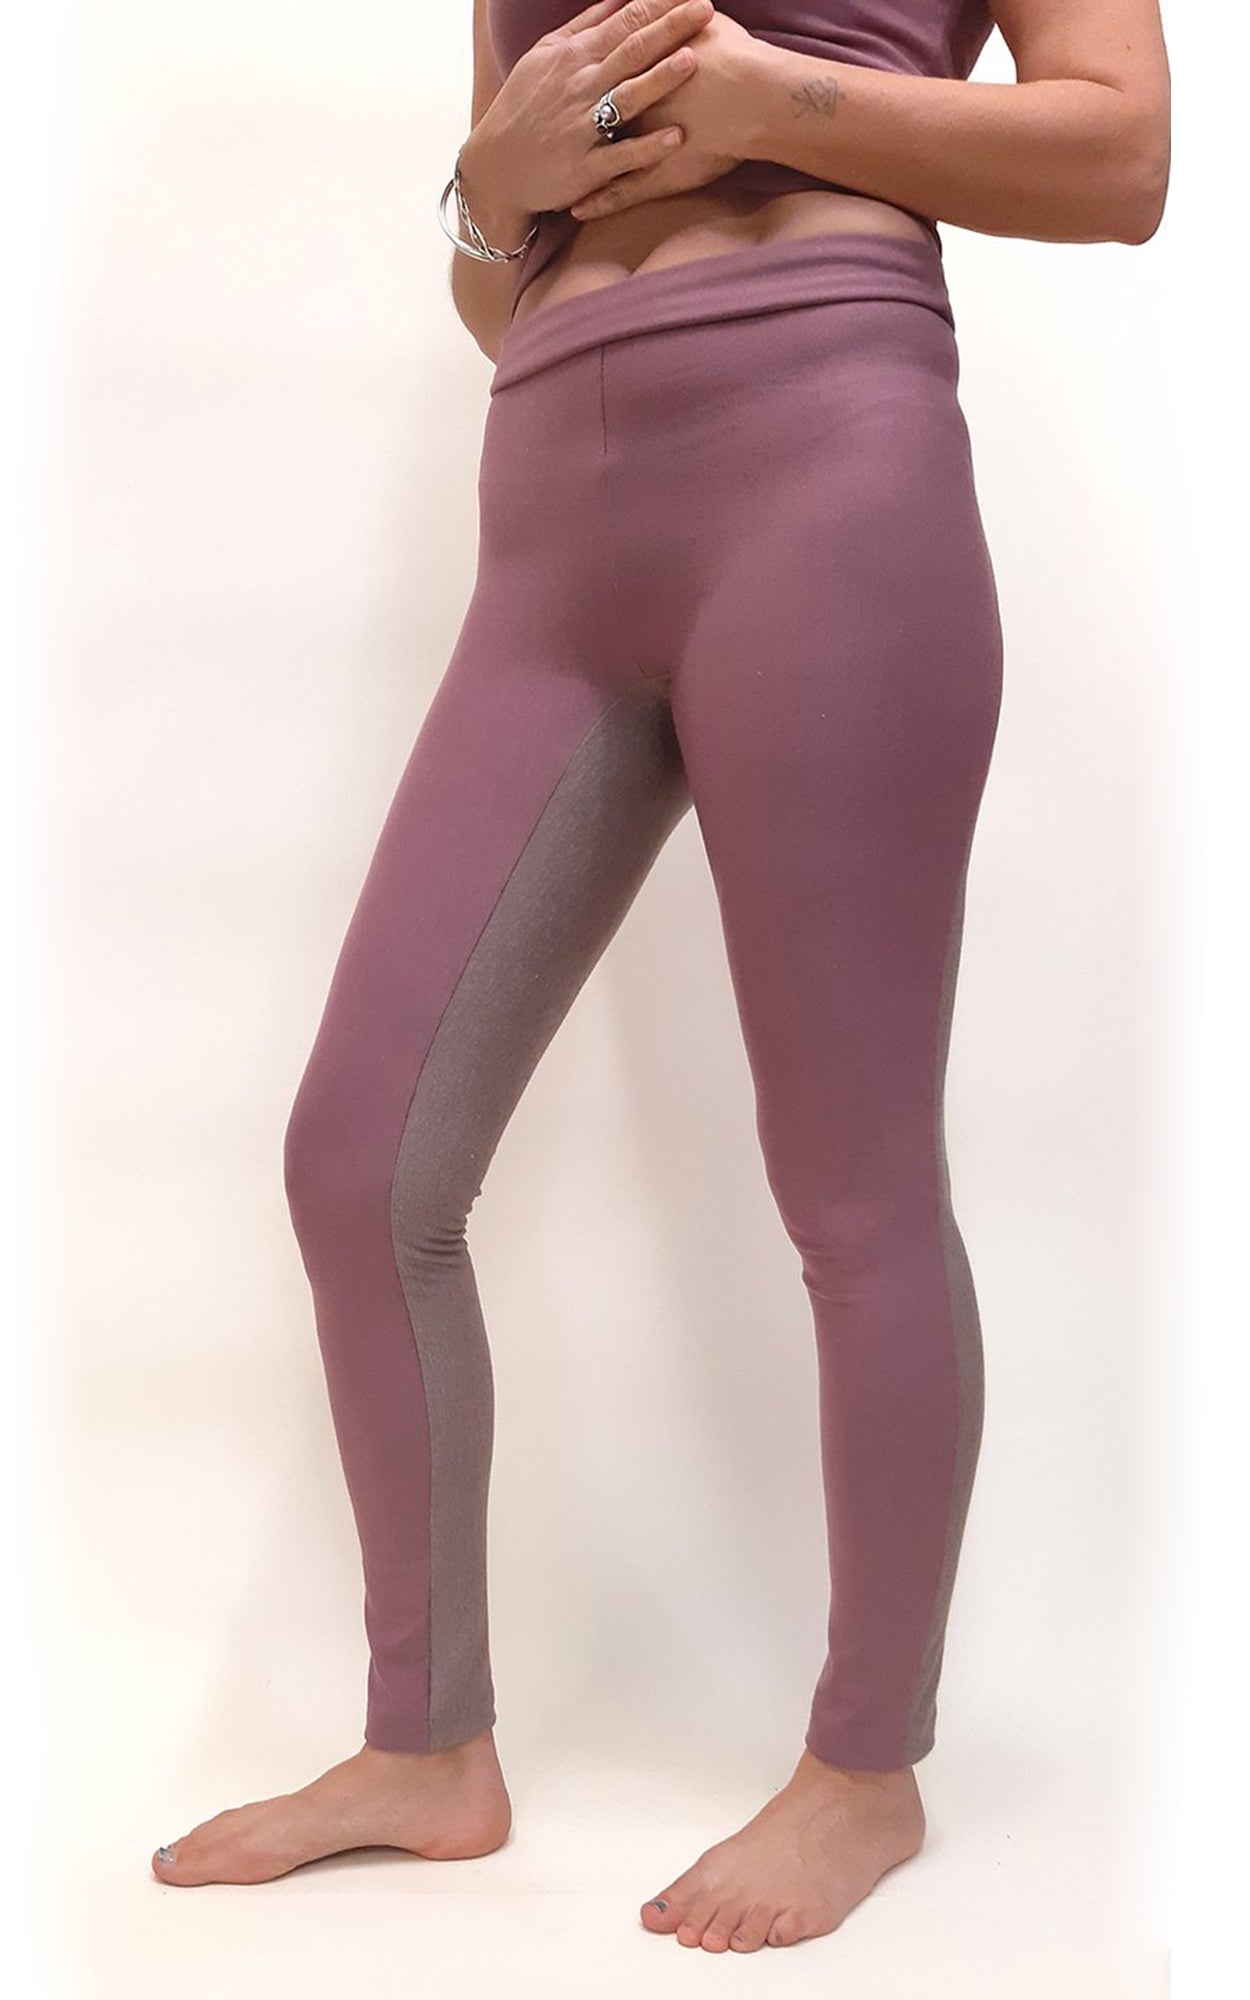 Bamboo Terry Leggings Riding Tights - Rose/Chocolate - TWO TONE